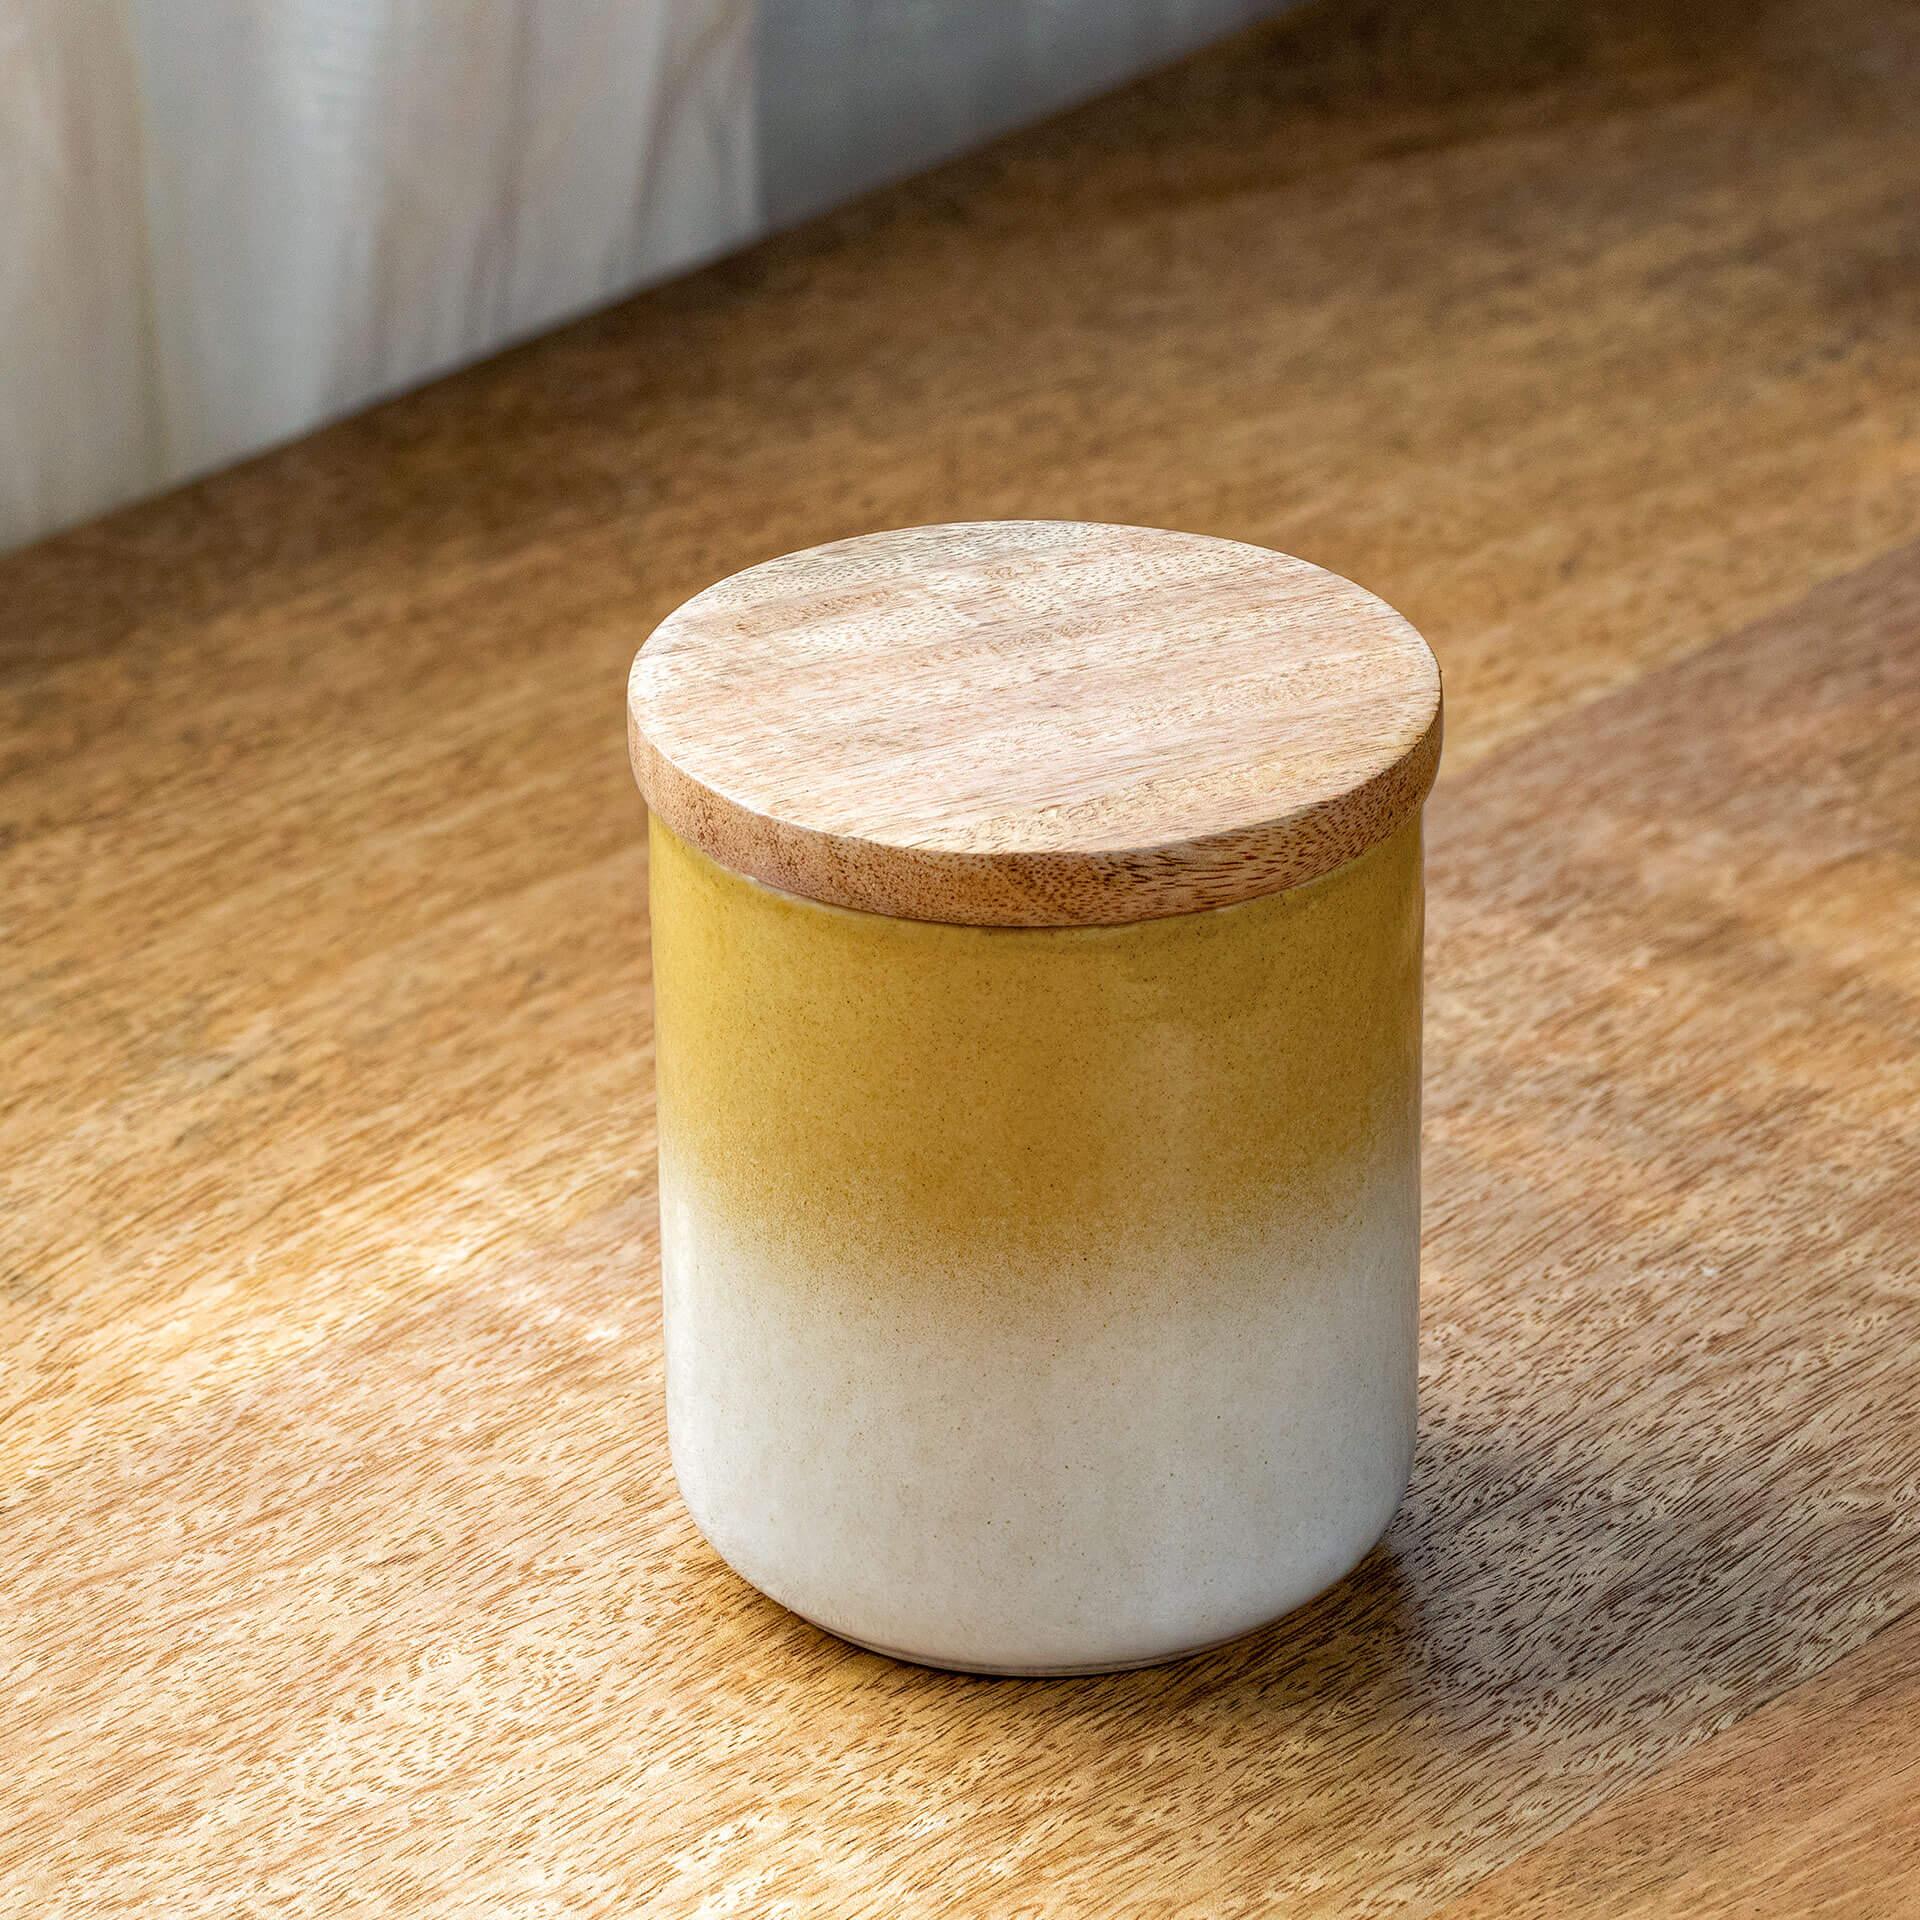 Ombre Mustard & White Ceramic Jar with Wooden Lid